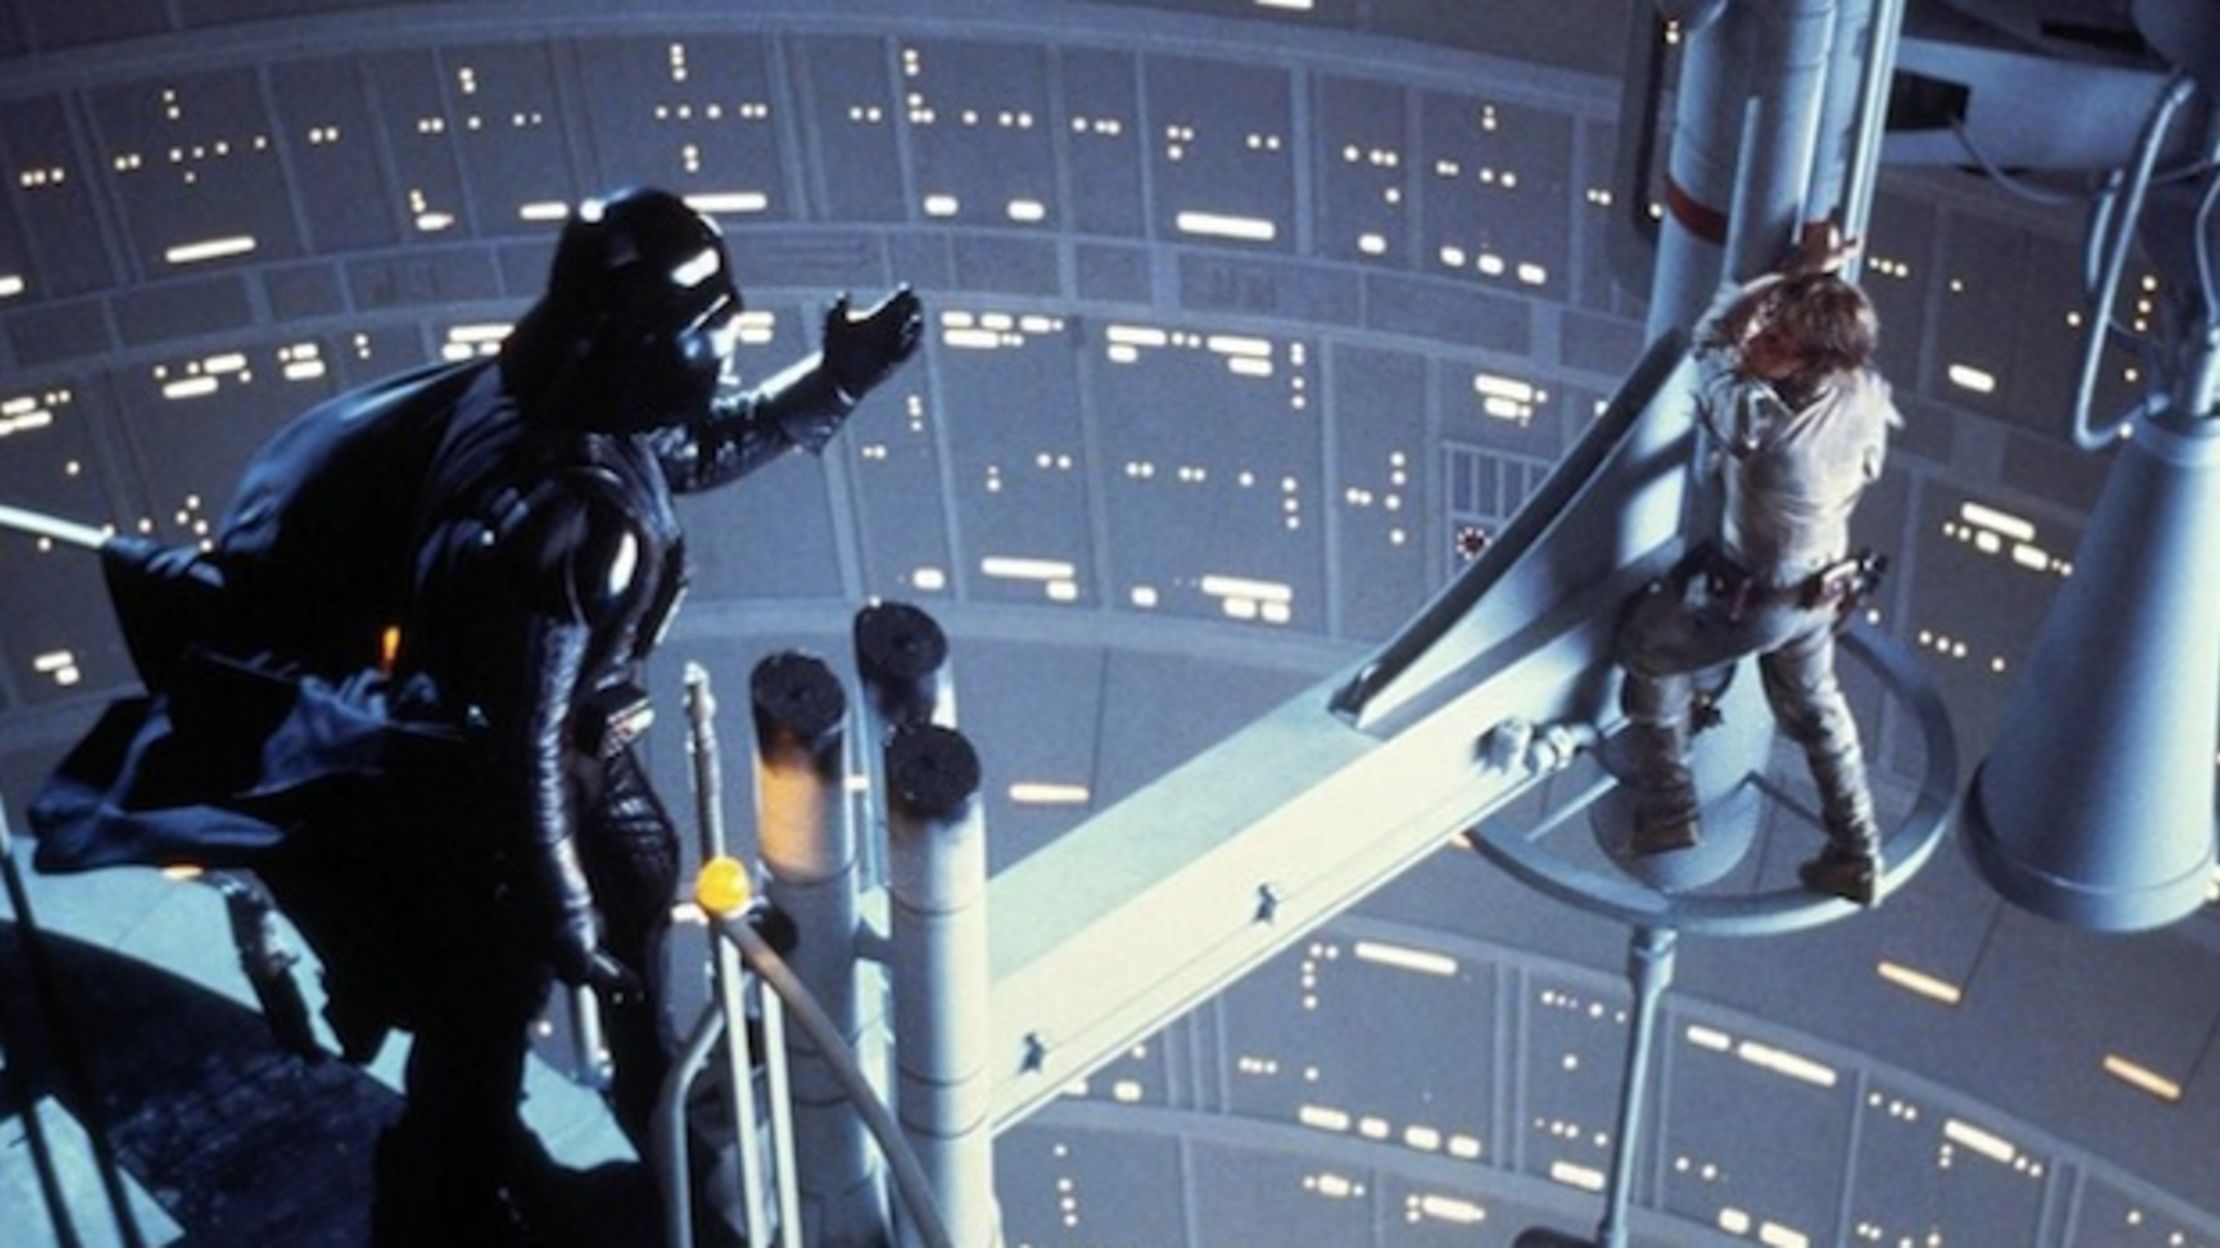 10 Fascinating Facts About 'The Empire Strikes Back' | Mental Floss